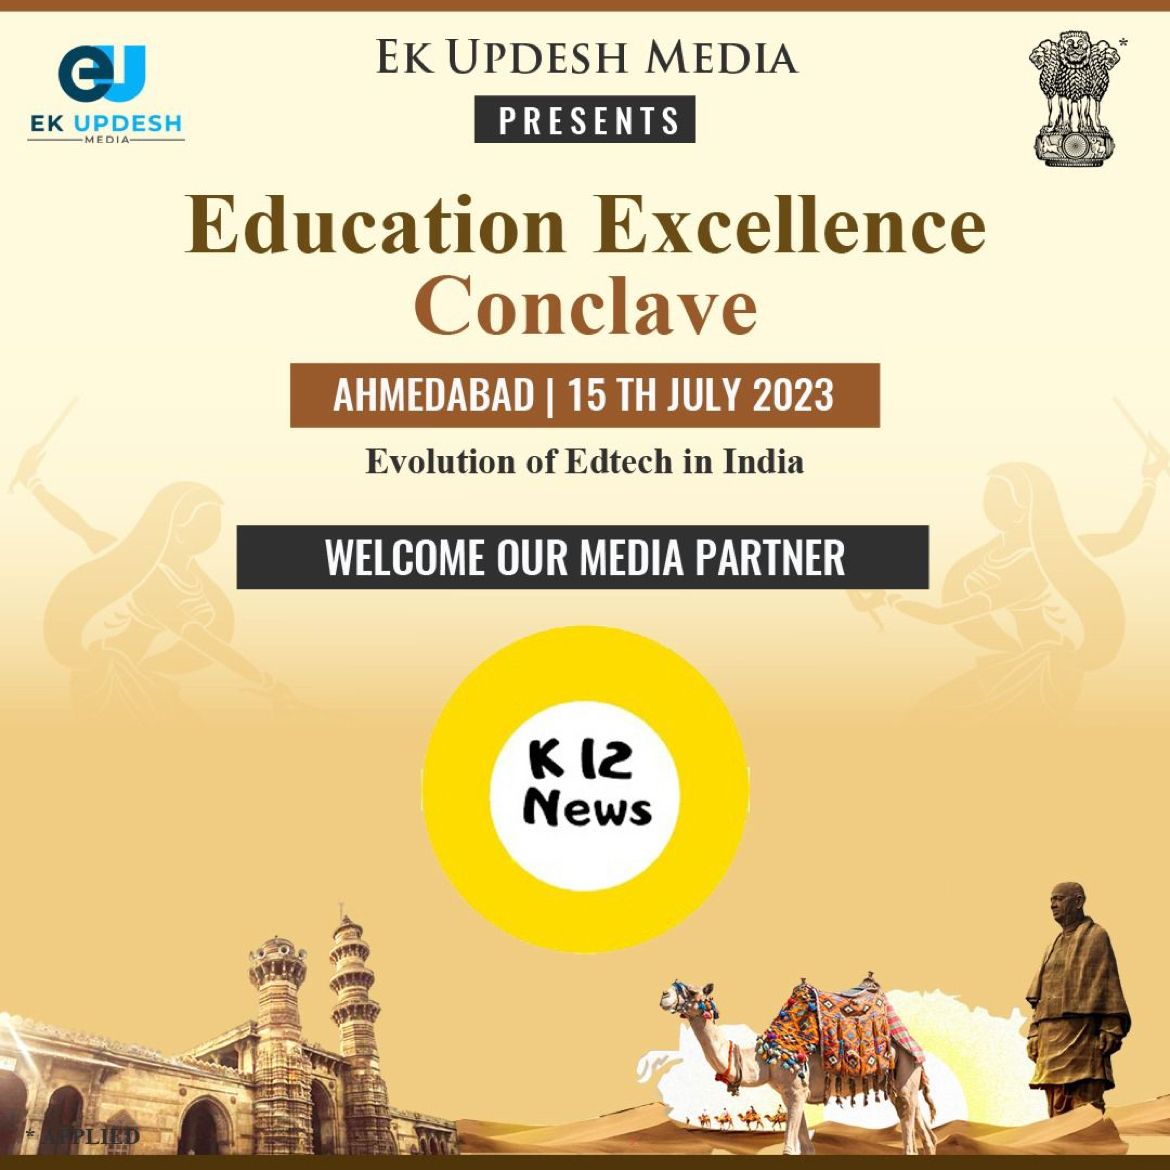 Education Excellence Awards Gujrat Edition Organised by EU Media, Hurry Up Nominate Now